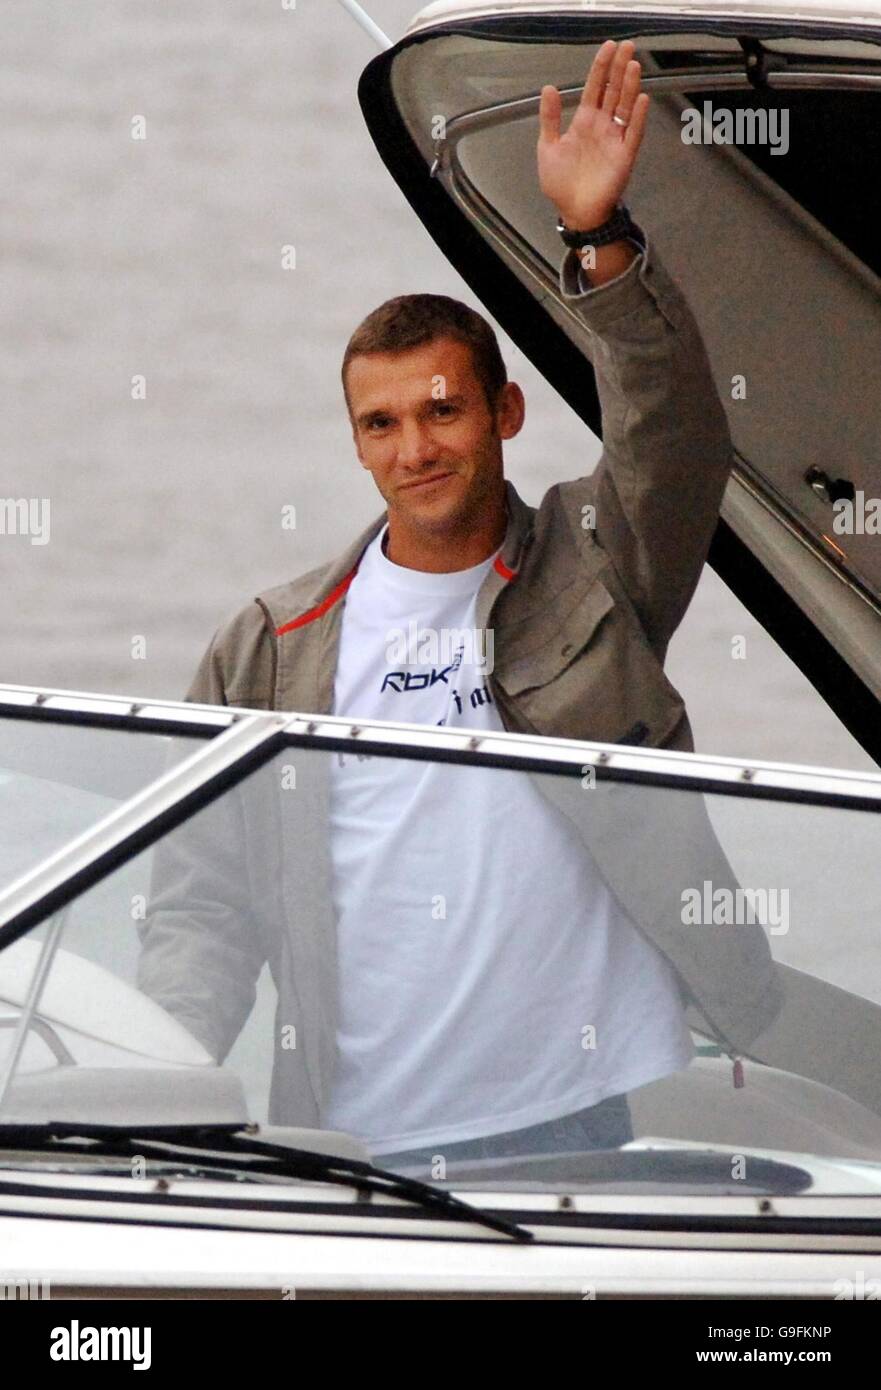 Newly signed Chelsea striker Andriy Schevchenko arrives on the Thames, London for a news conference announcing he has signed to the sports wear label Reebok. PRESS ASSOCIATION Photo. Picture date on: Monday August 14 2006. See PA story. Photo credit should read Fiona Hanson/PA Stock Photo